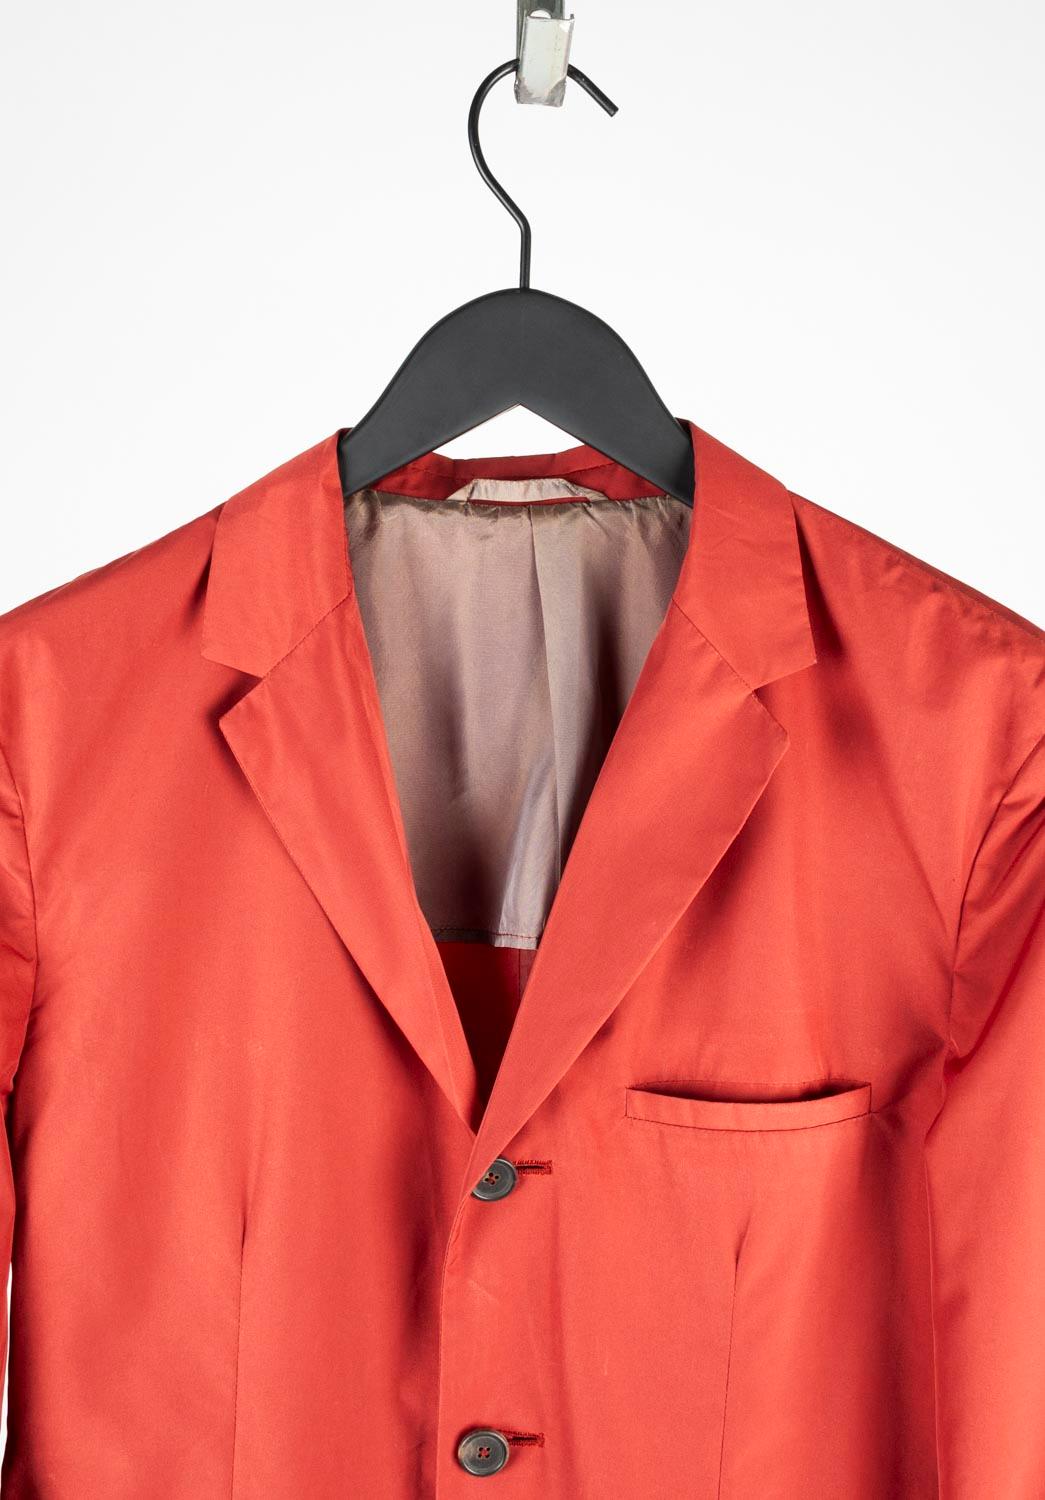 100% genuine Jil Sander Light Blazer, S663 
Color: off red/brick
(An actual color may a bit vary due to individual computer screen interpretation)
Material: 100% polyester/nylon (label washed out after dry cleaning
Tag size: ITA48 (Medium)
This